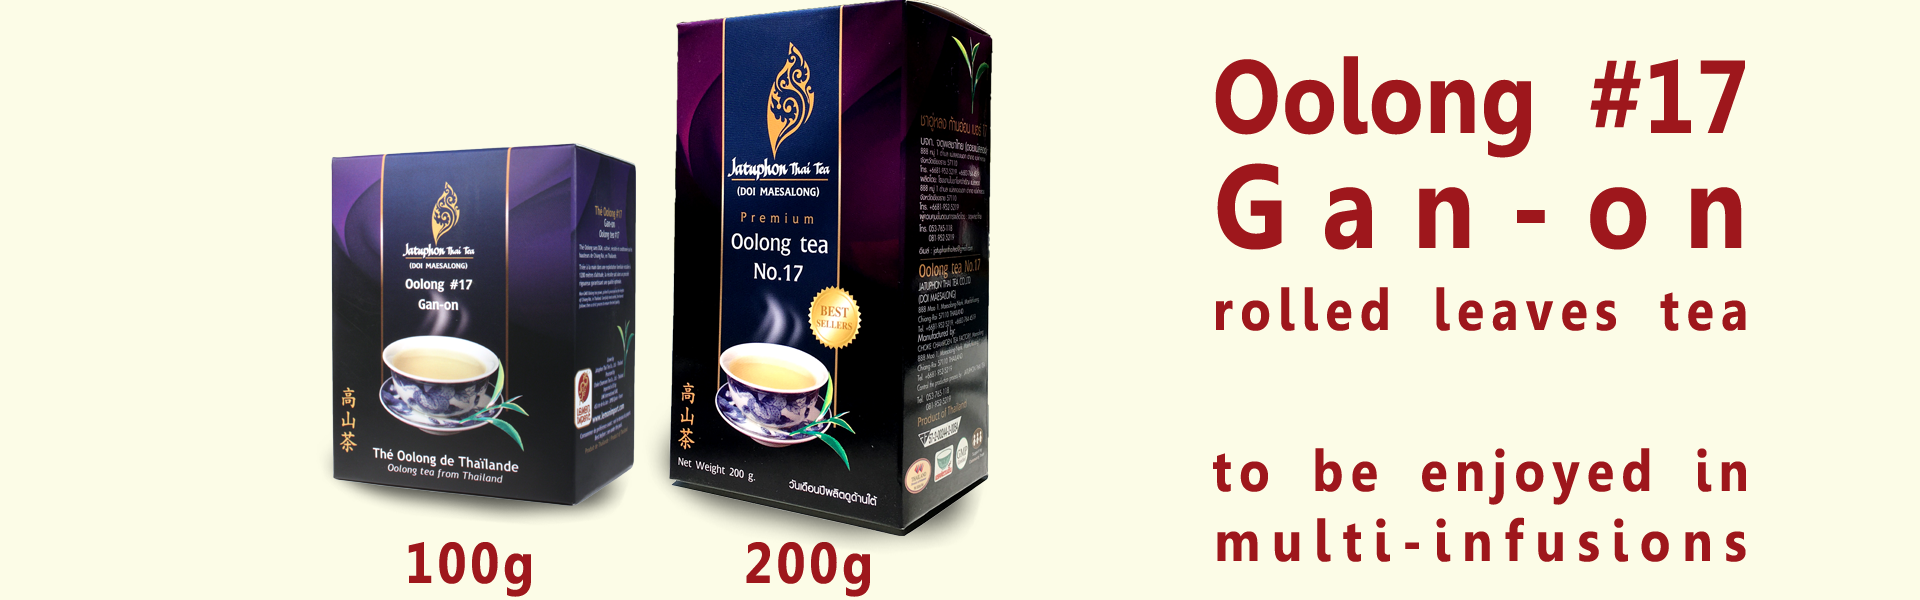 Our Oolong #17 Gan-on is available in 100g ou 200g format.